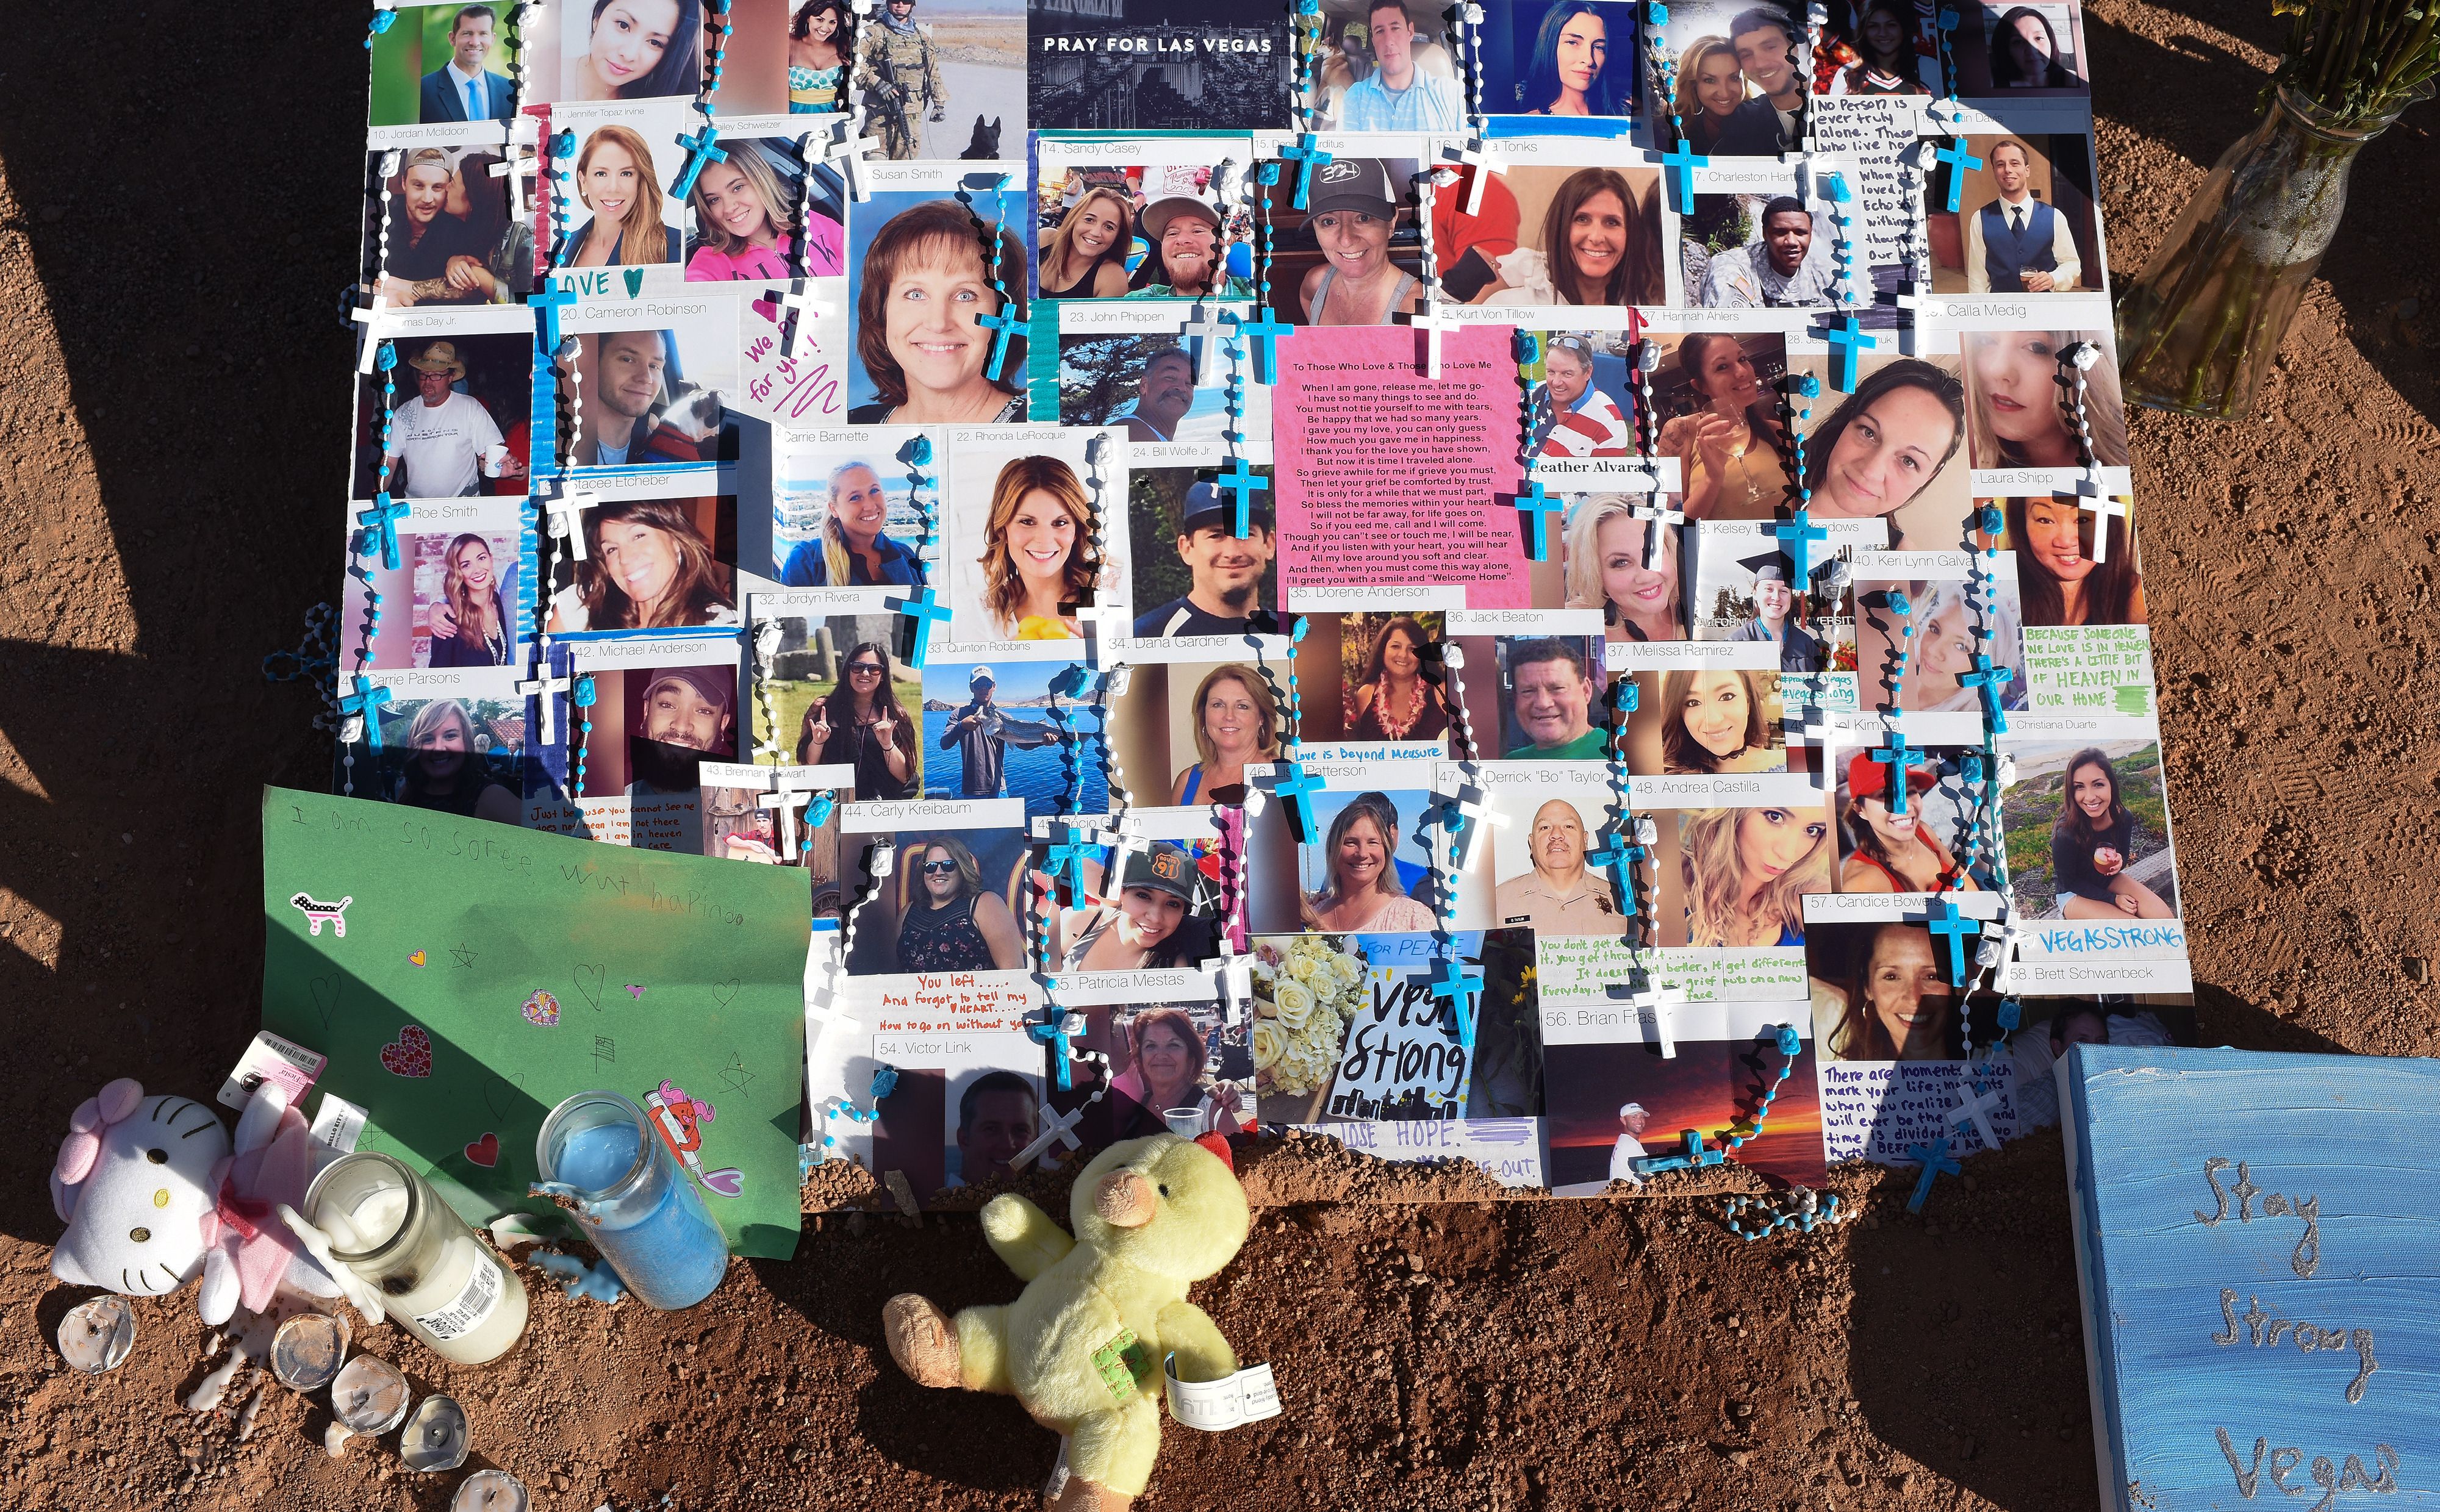 Photographs of some of the victims of the Las Vegas mass shooting